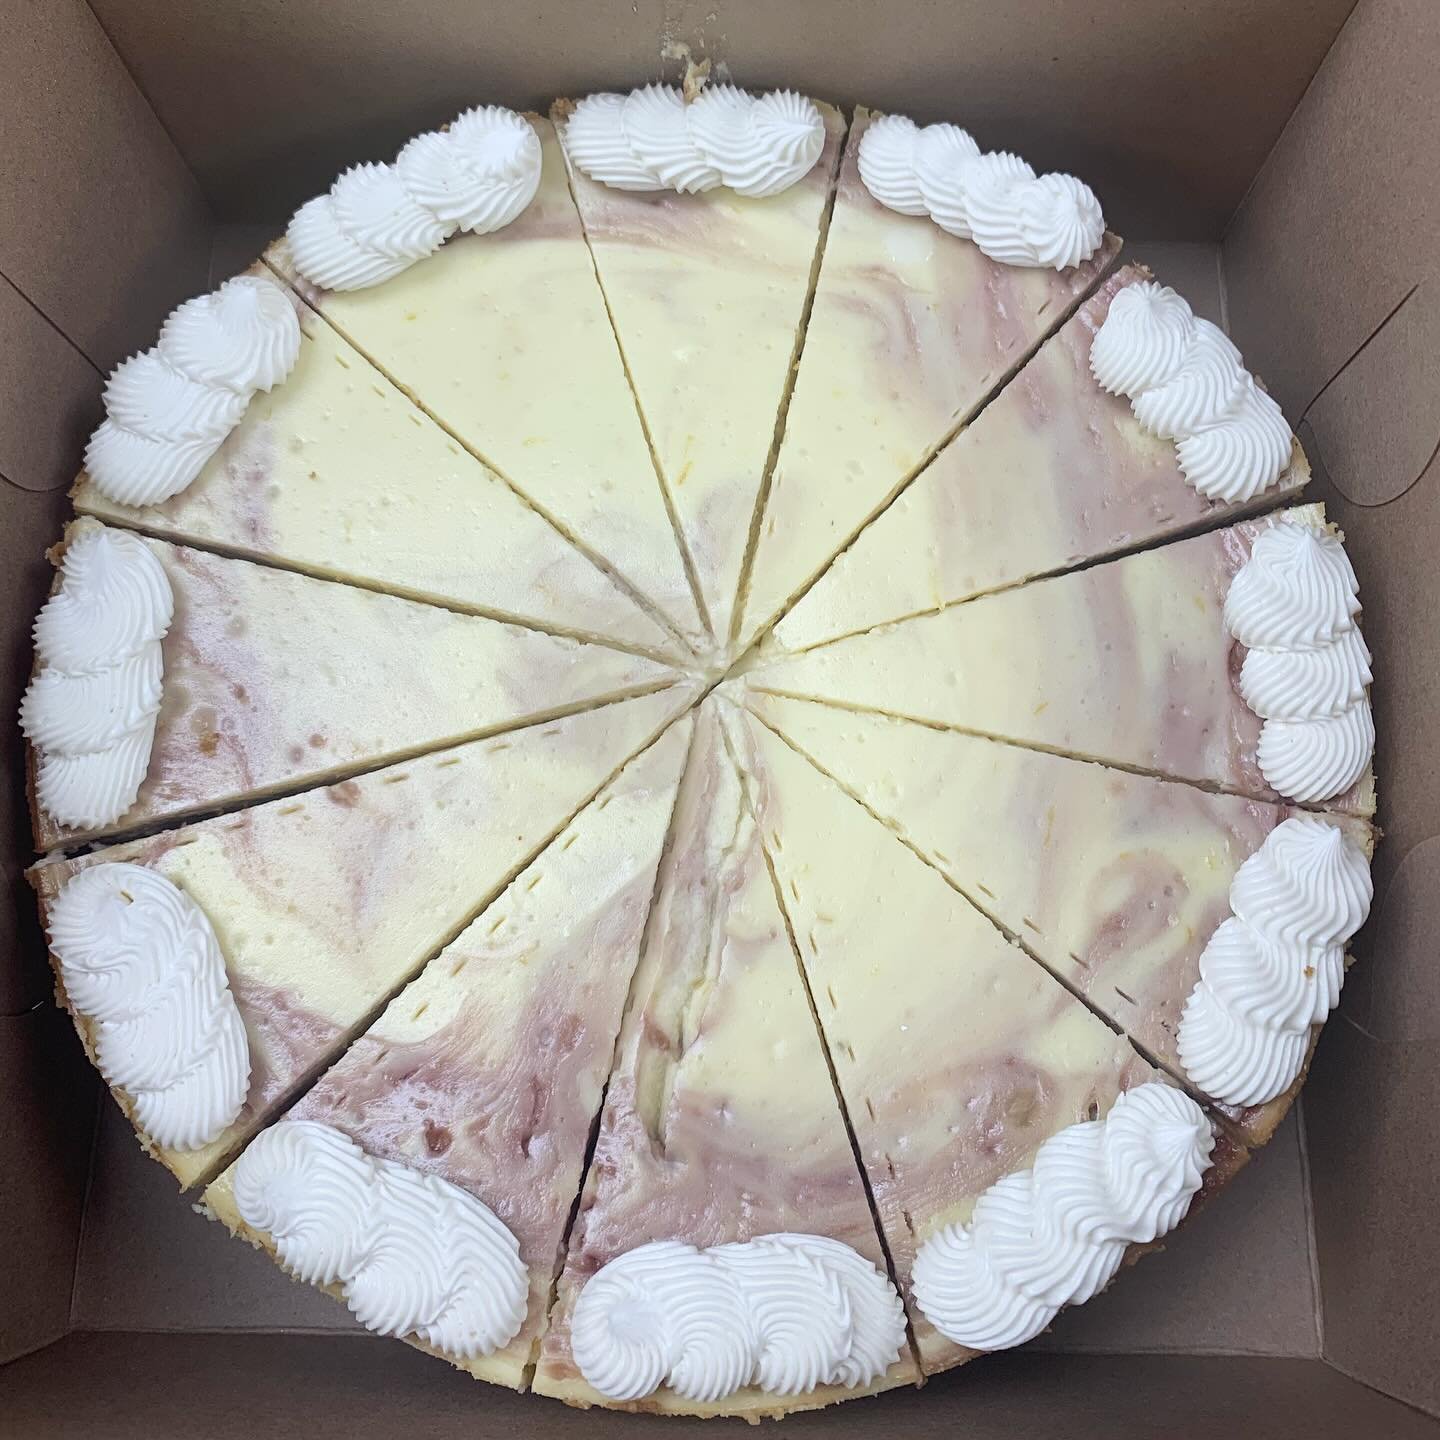 Lots of cheesecakes got dropped today to our friends over at @bigleaguesportsbargrill and to @nineirishbrothers Lafayette!! Lots of bright spring flavors for this beautiful week ahead! 🍋🫐🍊🍓🍋&zwj;🟩